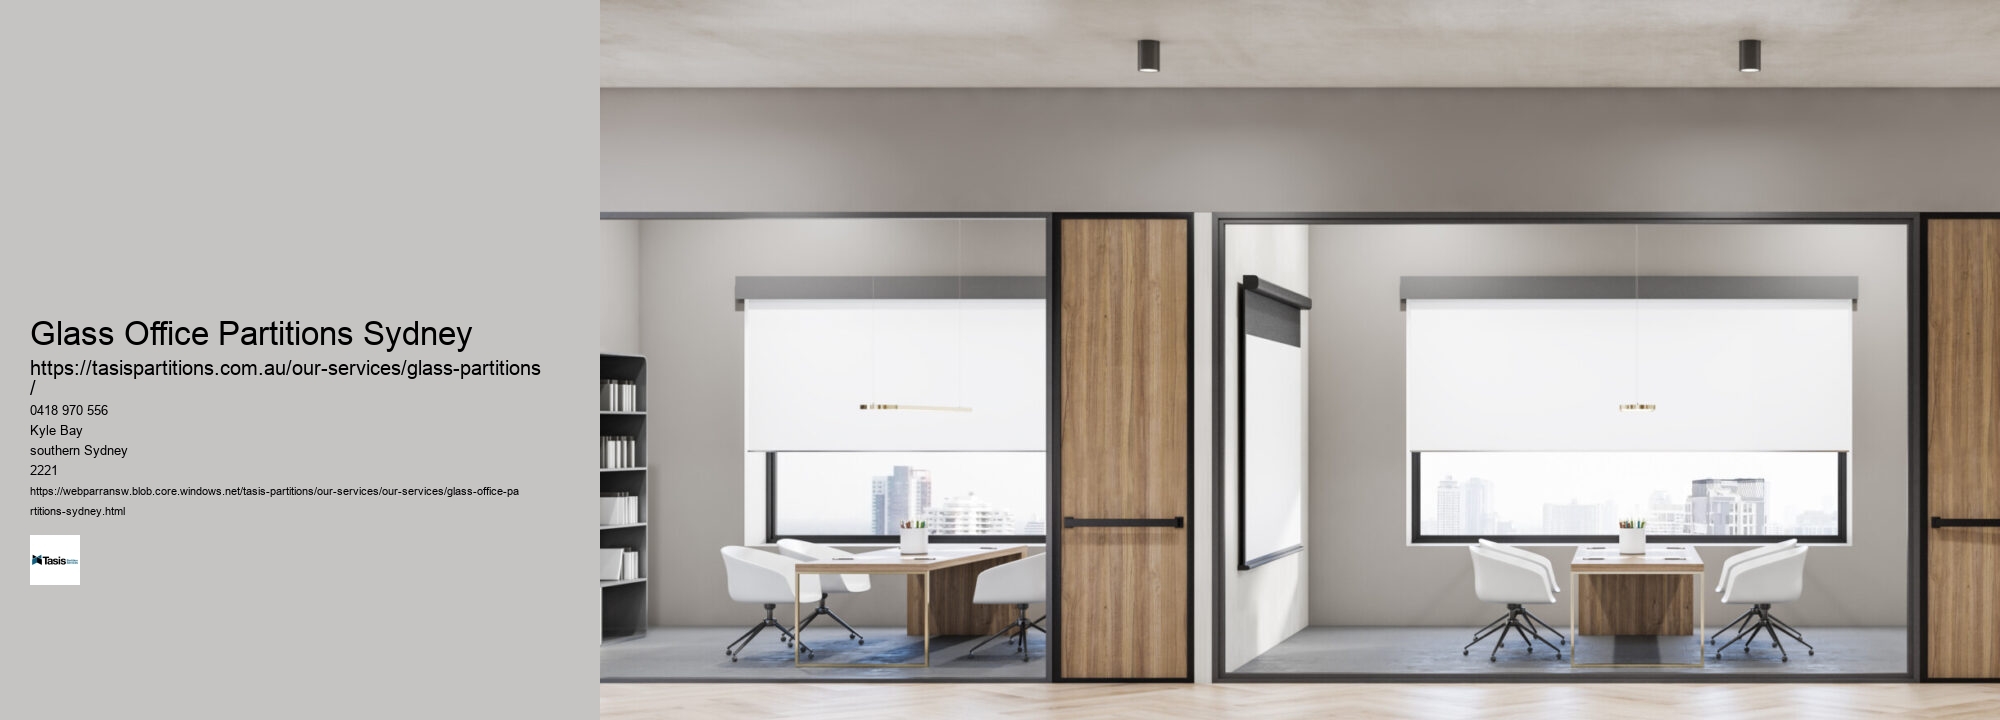 Glass Office Partitions Sydney